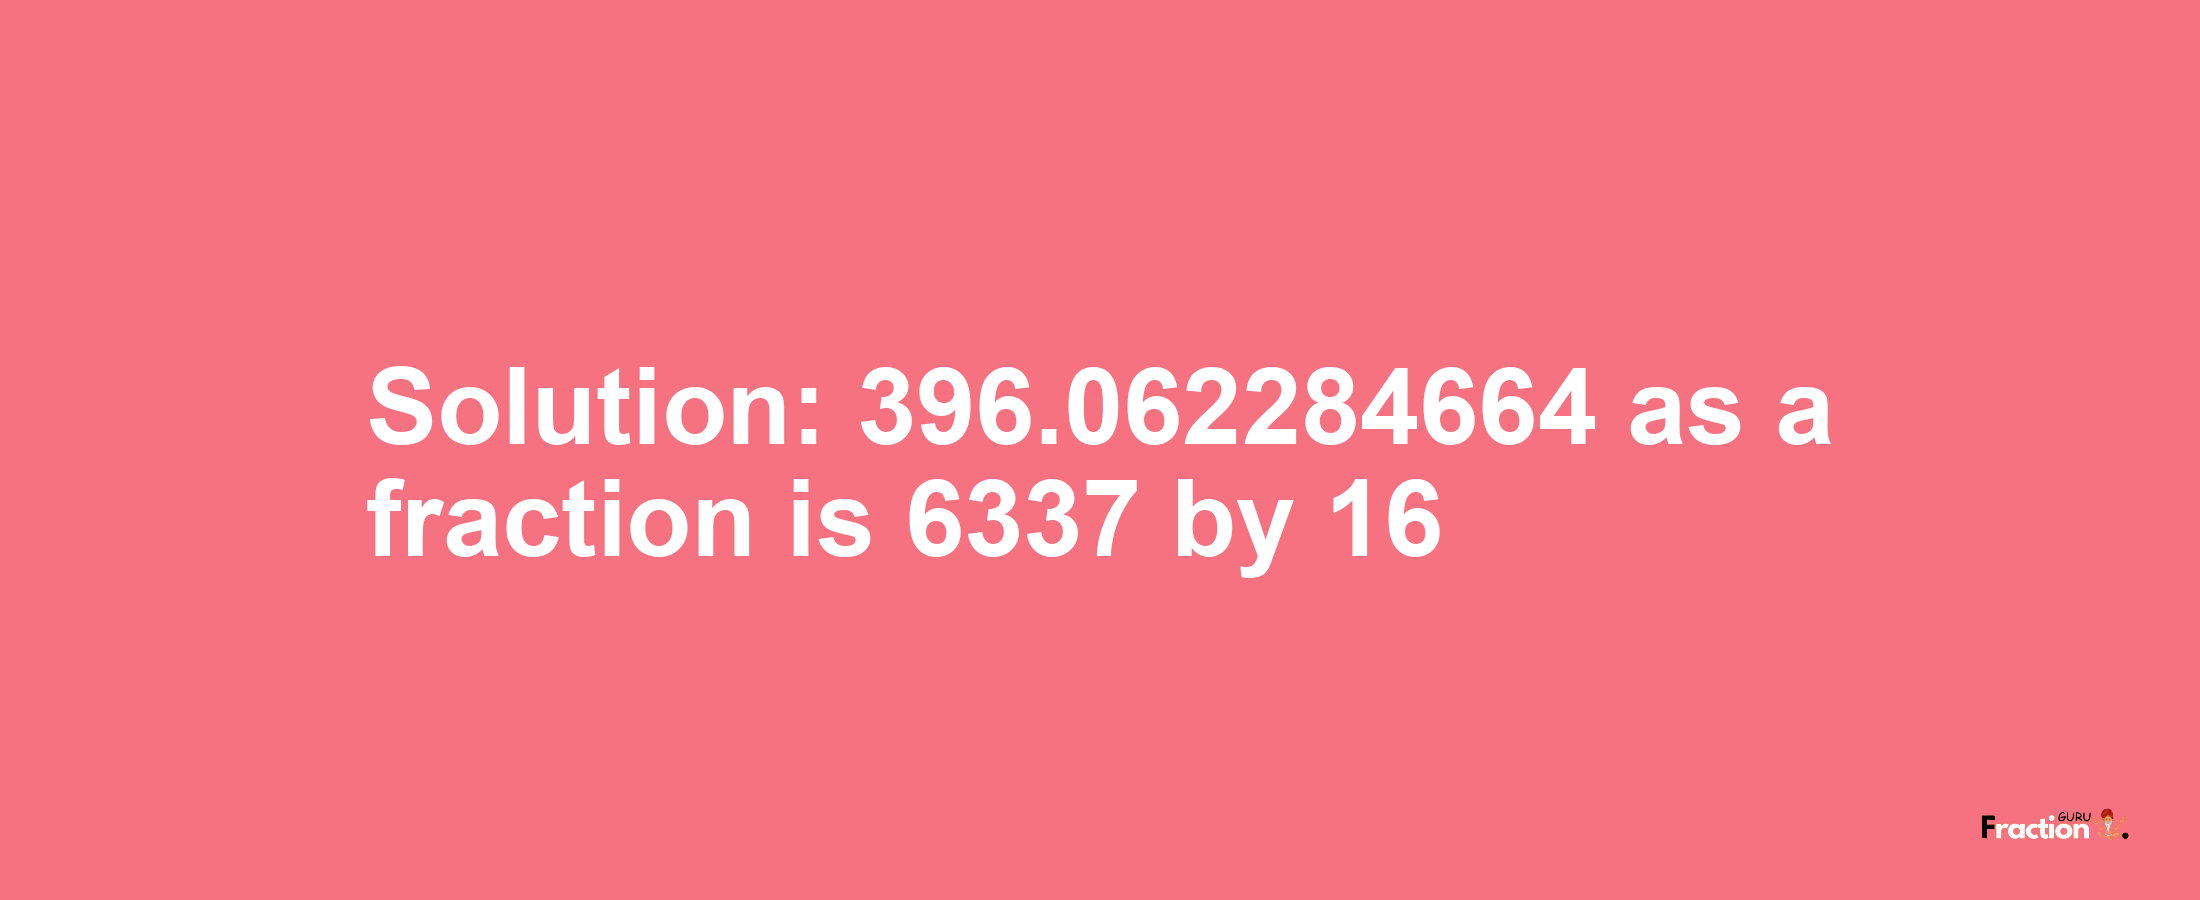 Solution:396.062284664 as a fraction is 6337/16